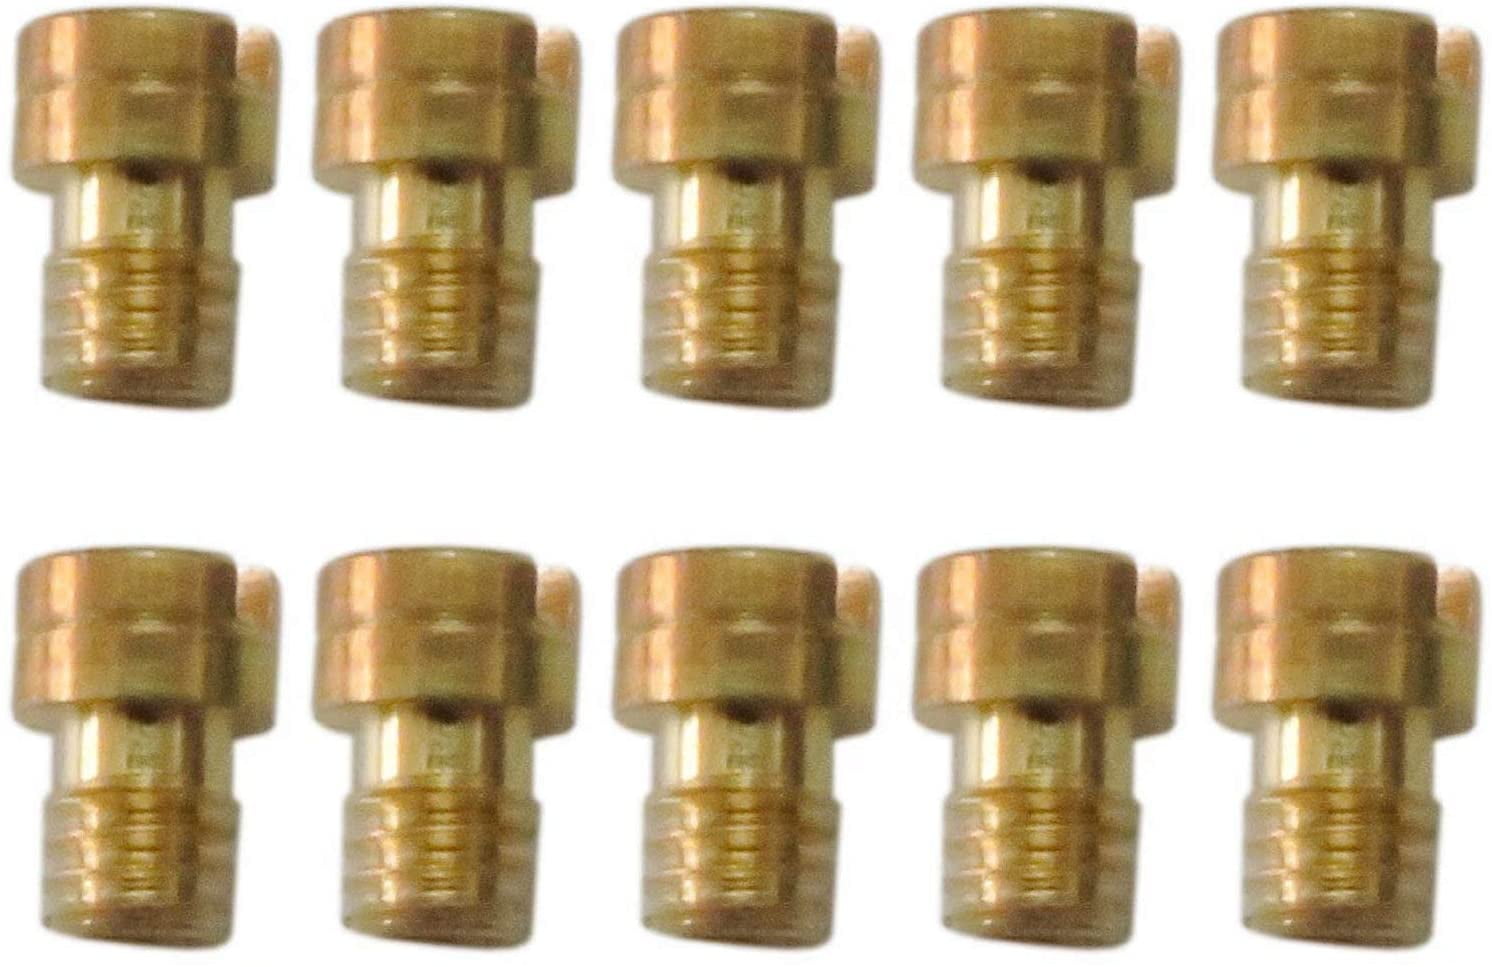 10X Round Head Main Jet 4mm for GY6 50cc 139QMB Scooter Keihin Carb PZ19 70-92